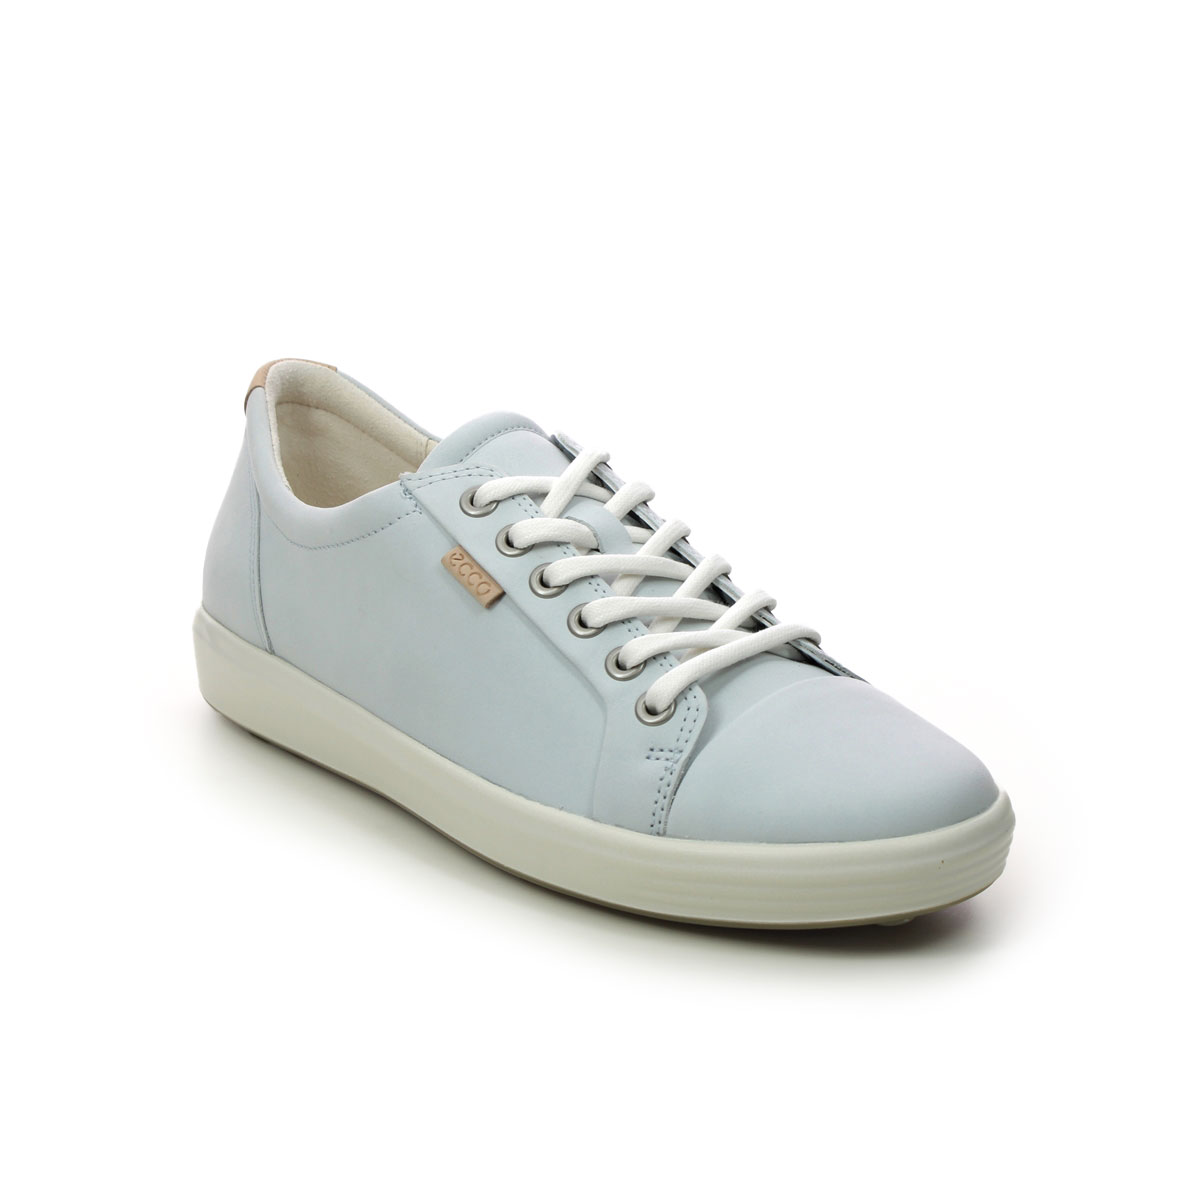 Ecco Soft 7 Lace Pale Blue Womens Trainers 430003-60728 In Size 37 In Plain Pale Blue